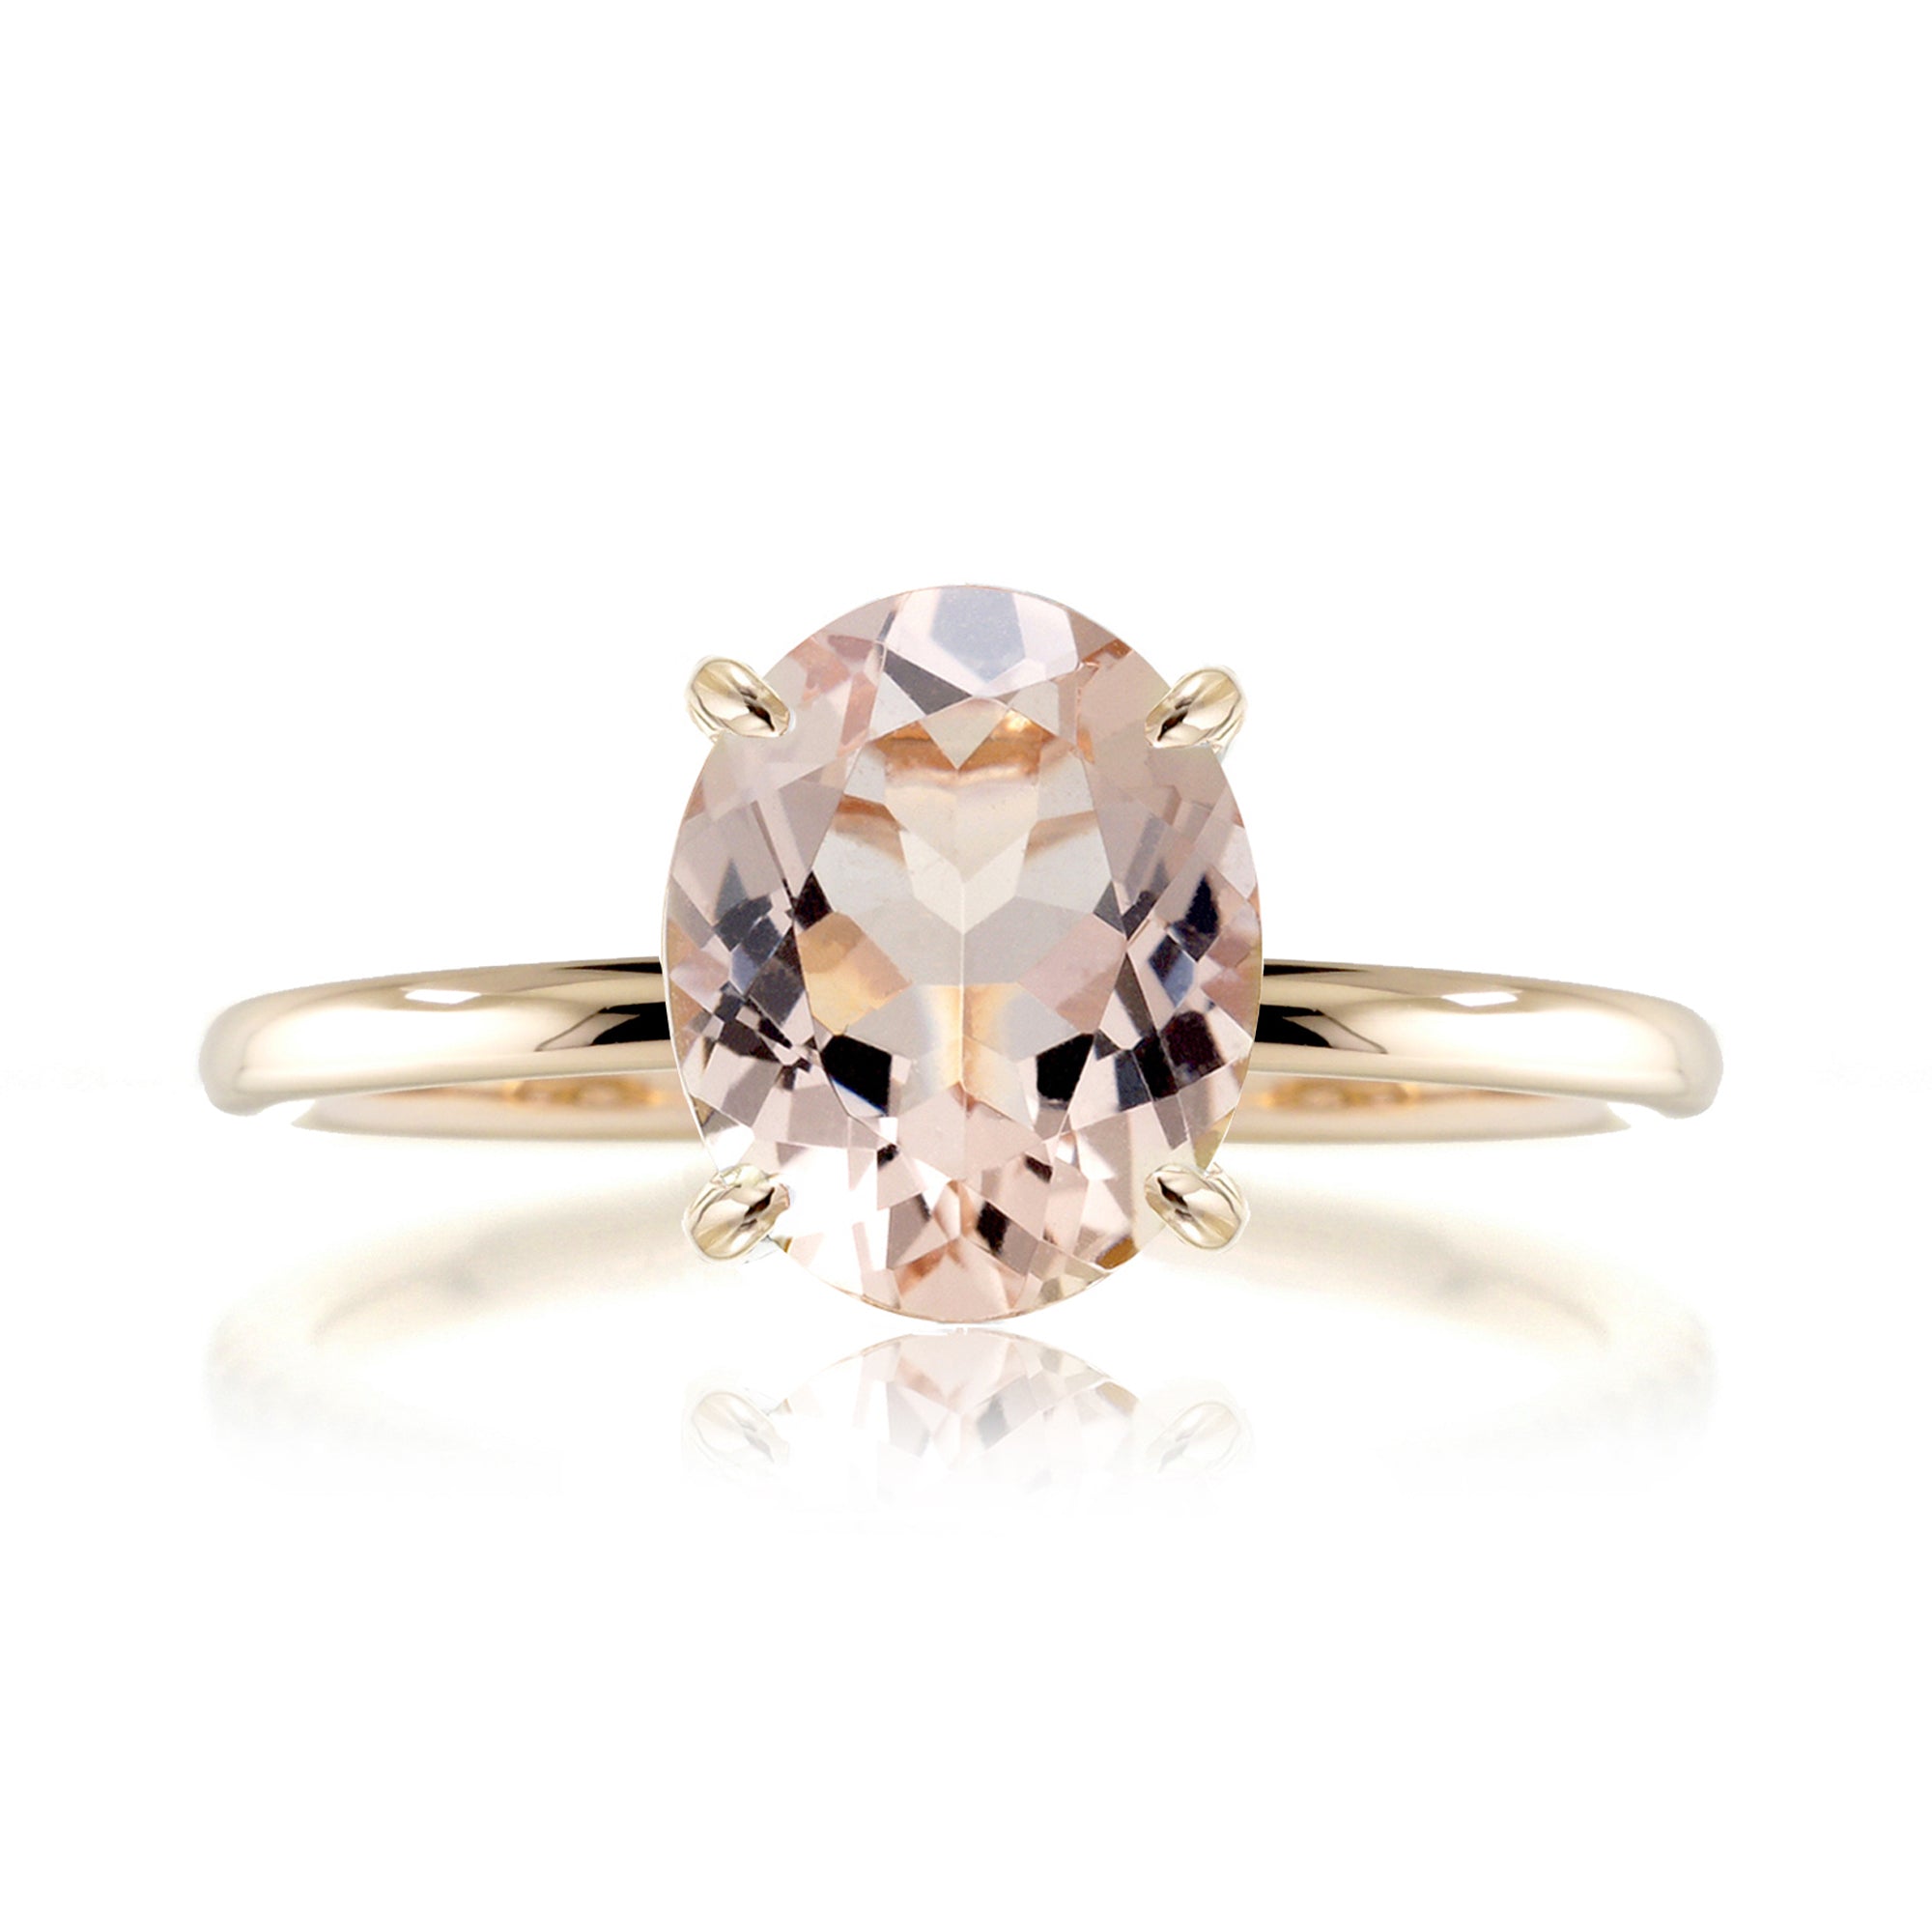 Oval morganite solid band engagement ring yellow gold - The Ava